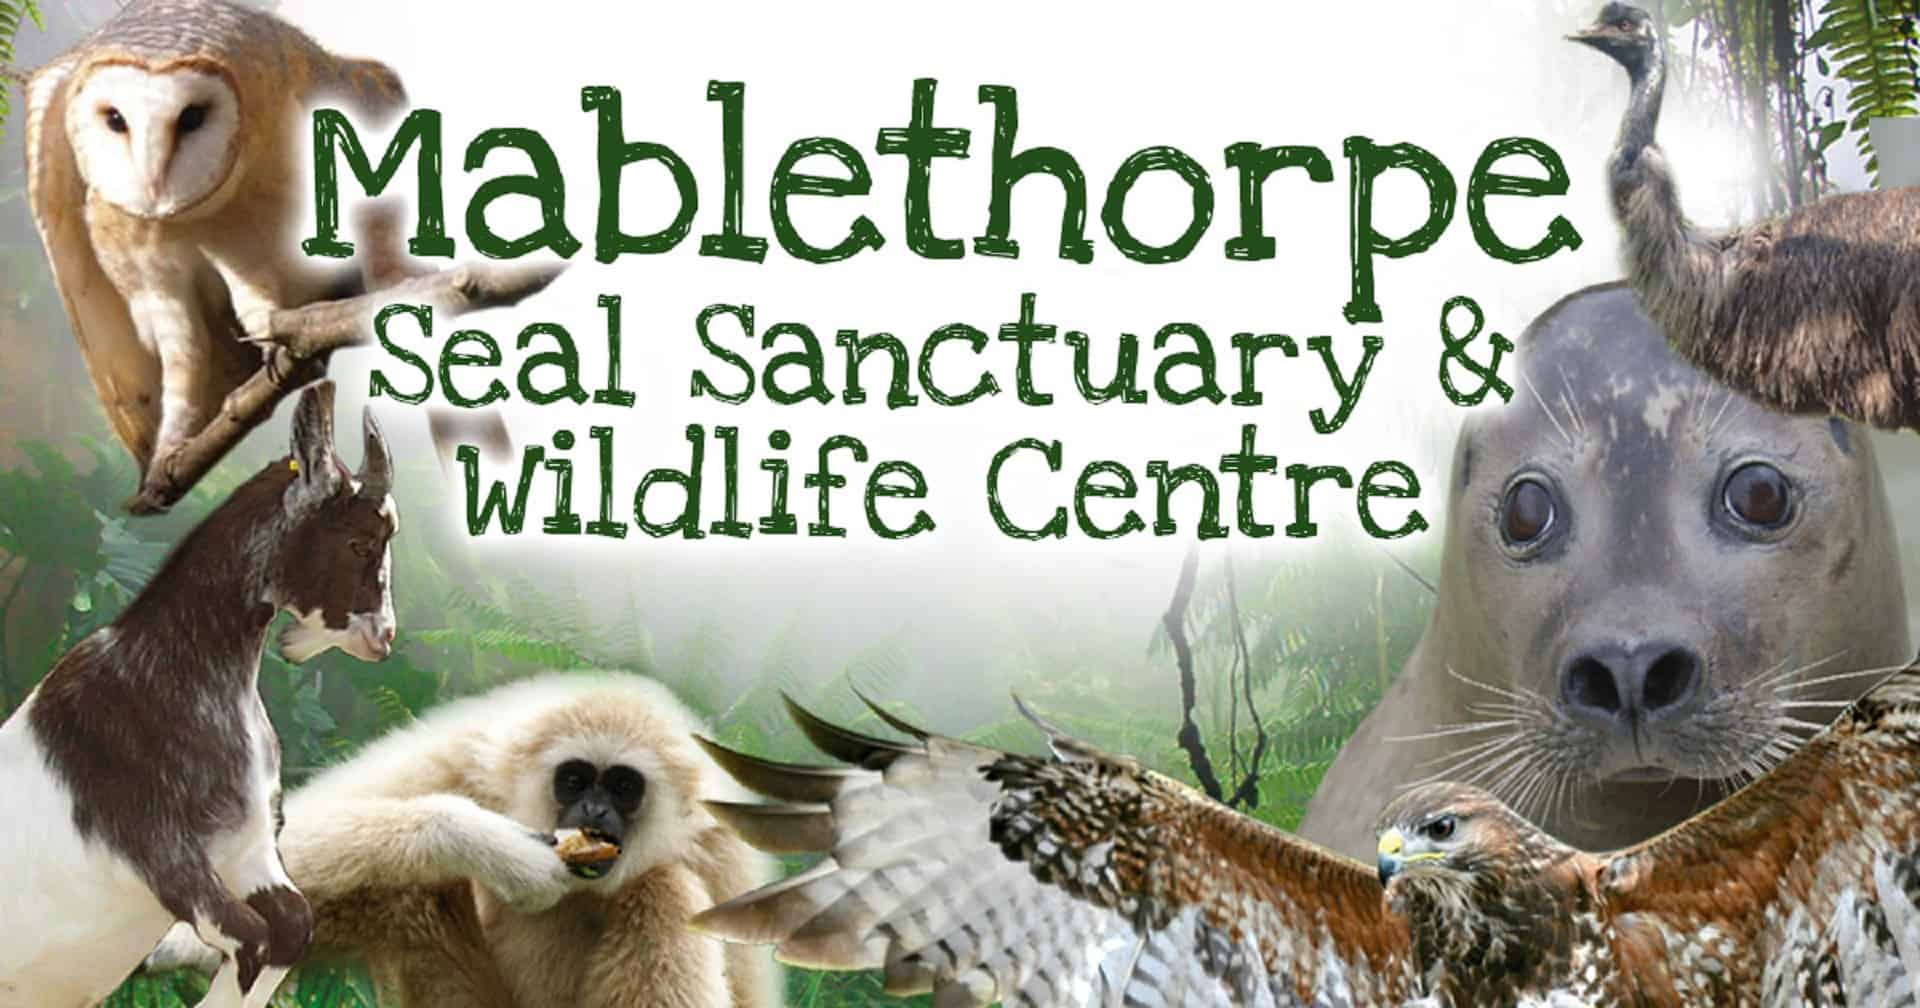 Mablethorpe Seal Sanctuary and Wildlife Centre in UK